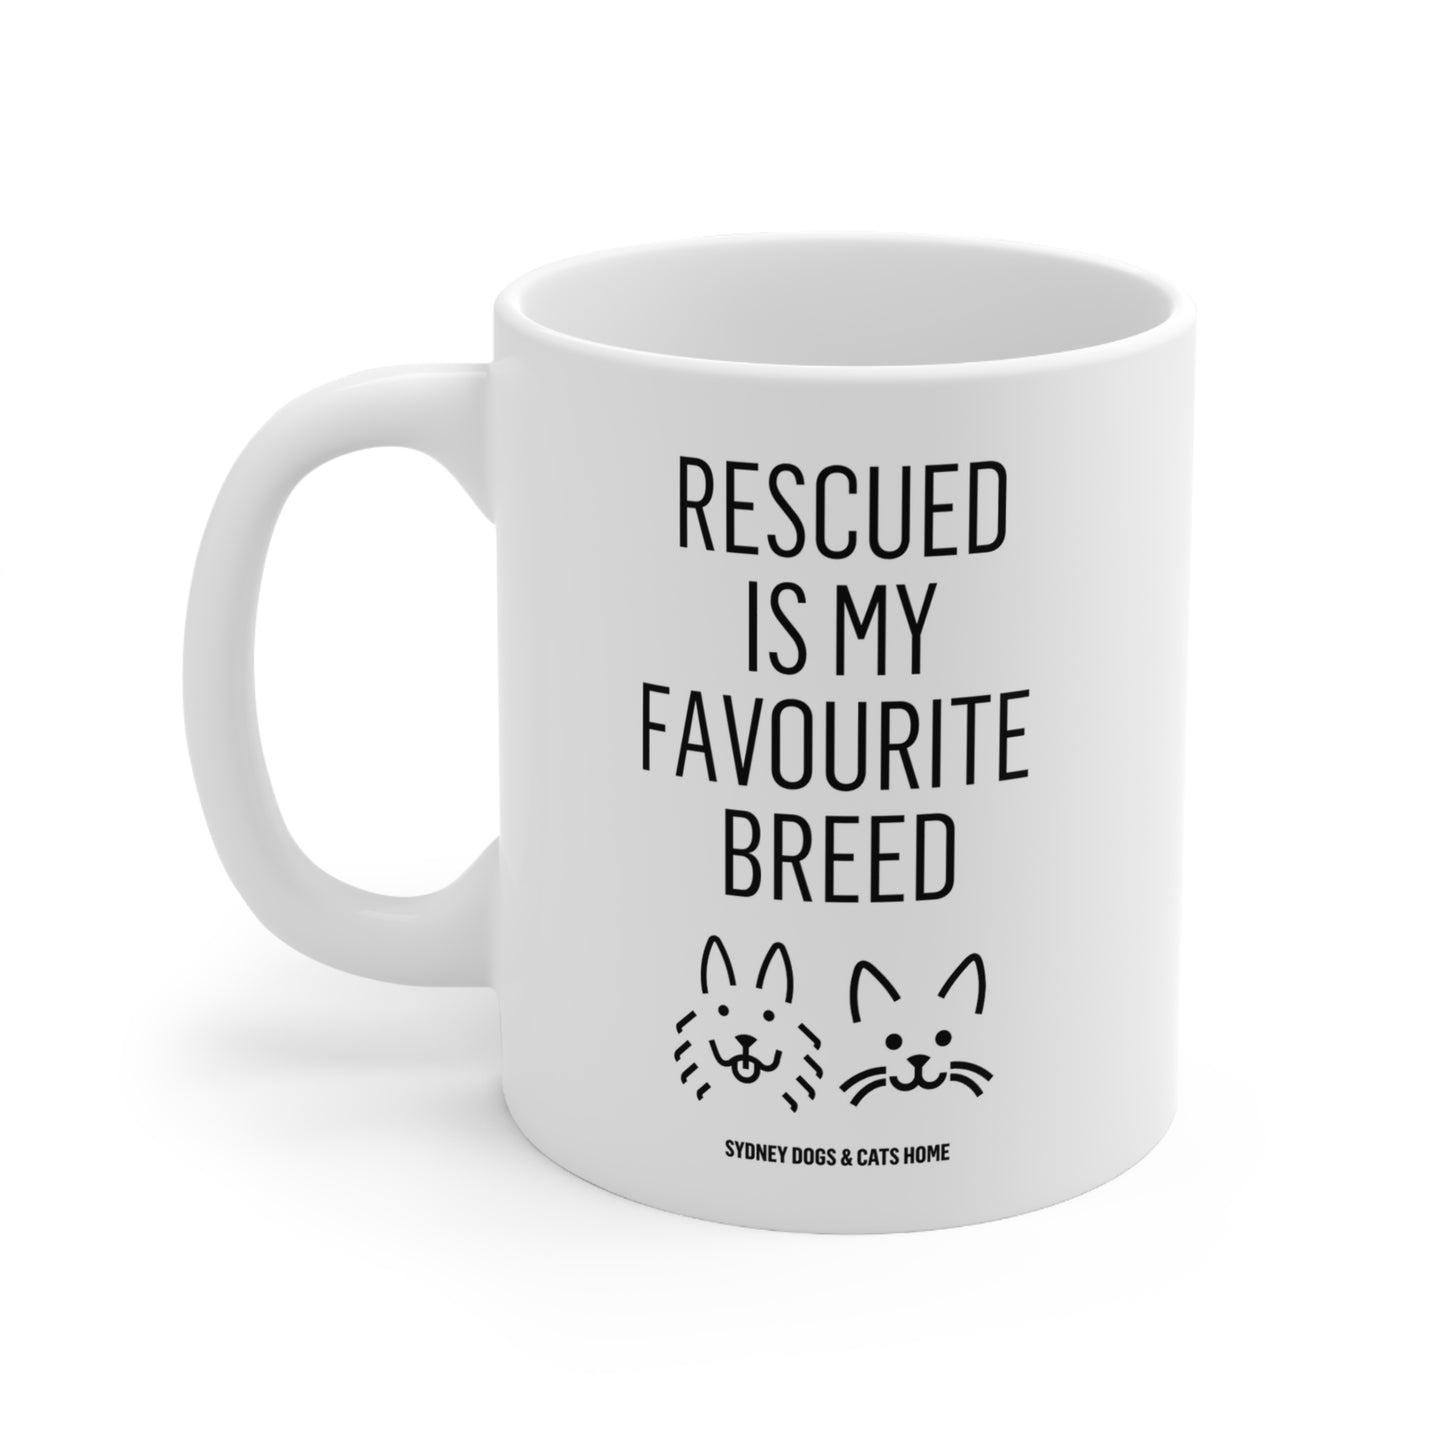 Mug - Rescued is my Favourite Breed